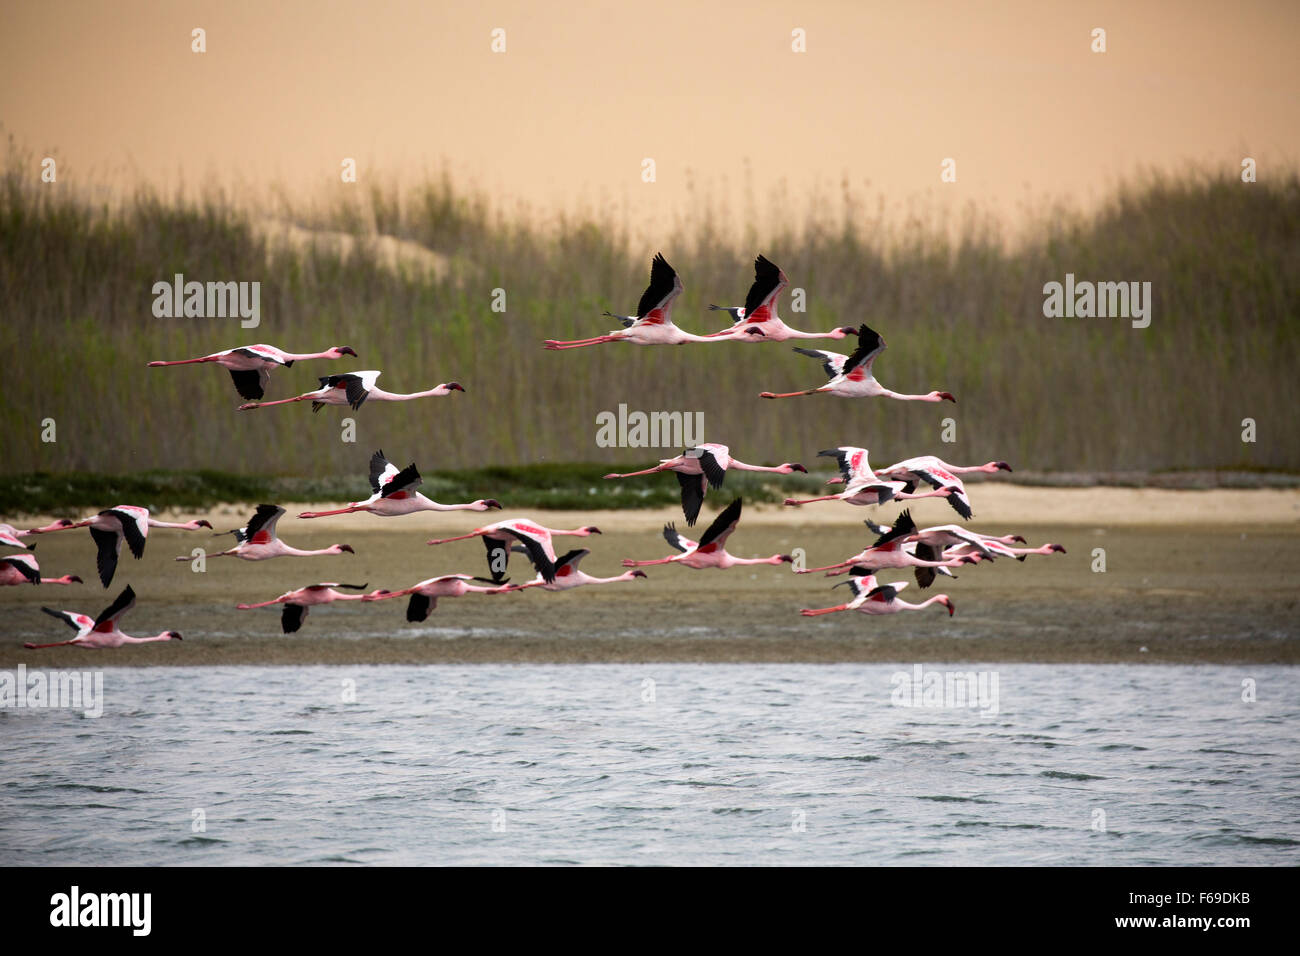 Pink flamingos in flight at Sandwich Harbor, Namibia, Africa Stock Photo